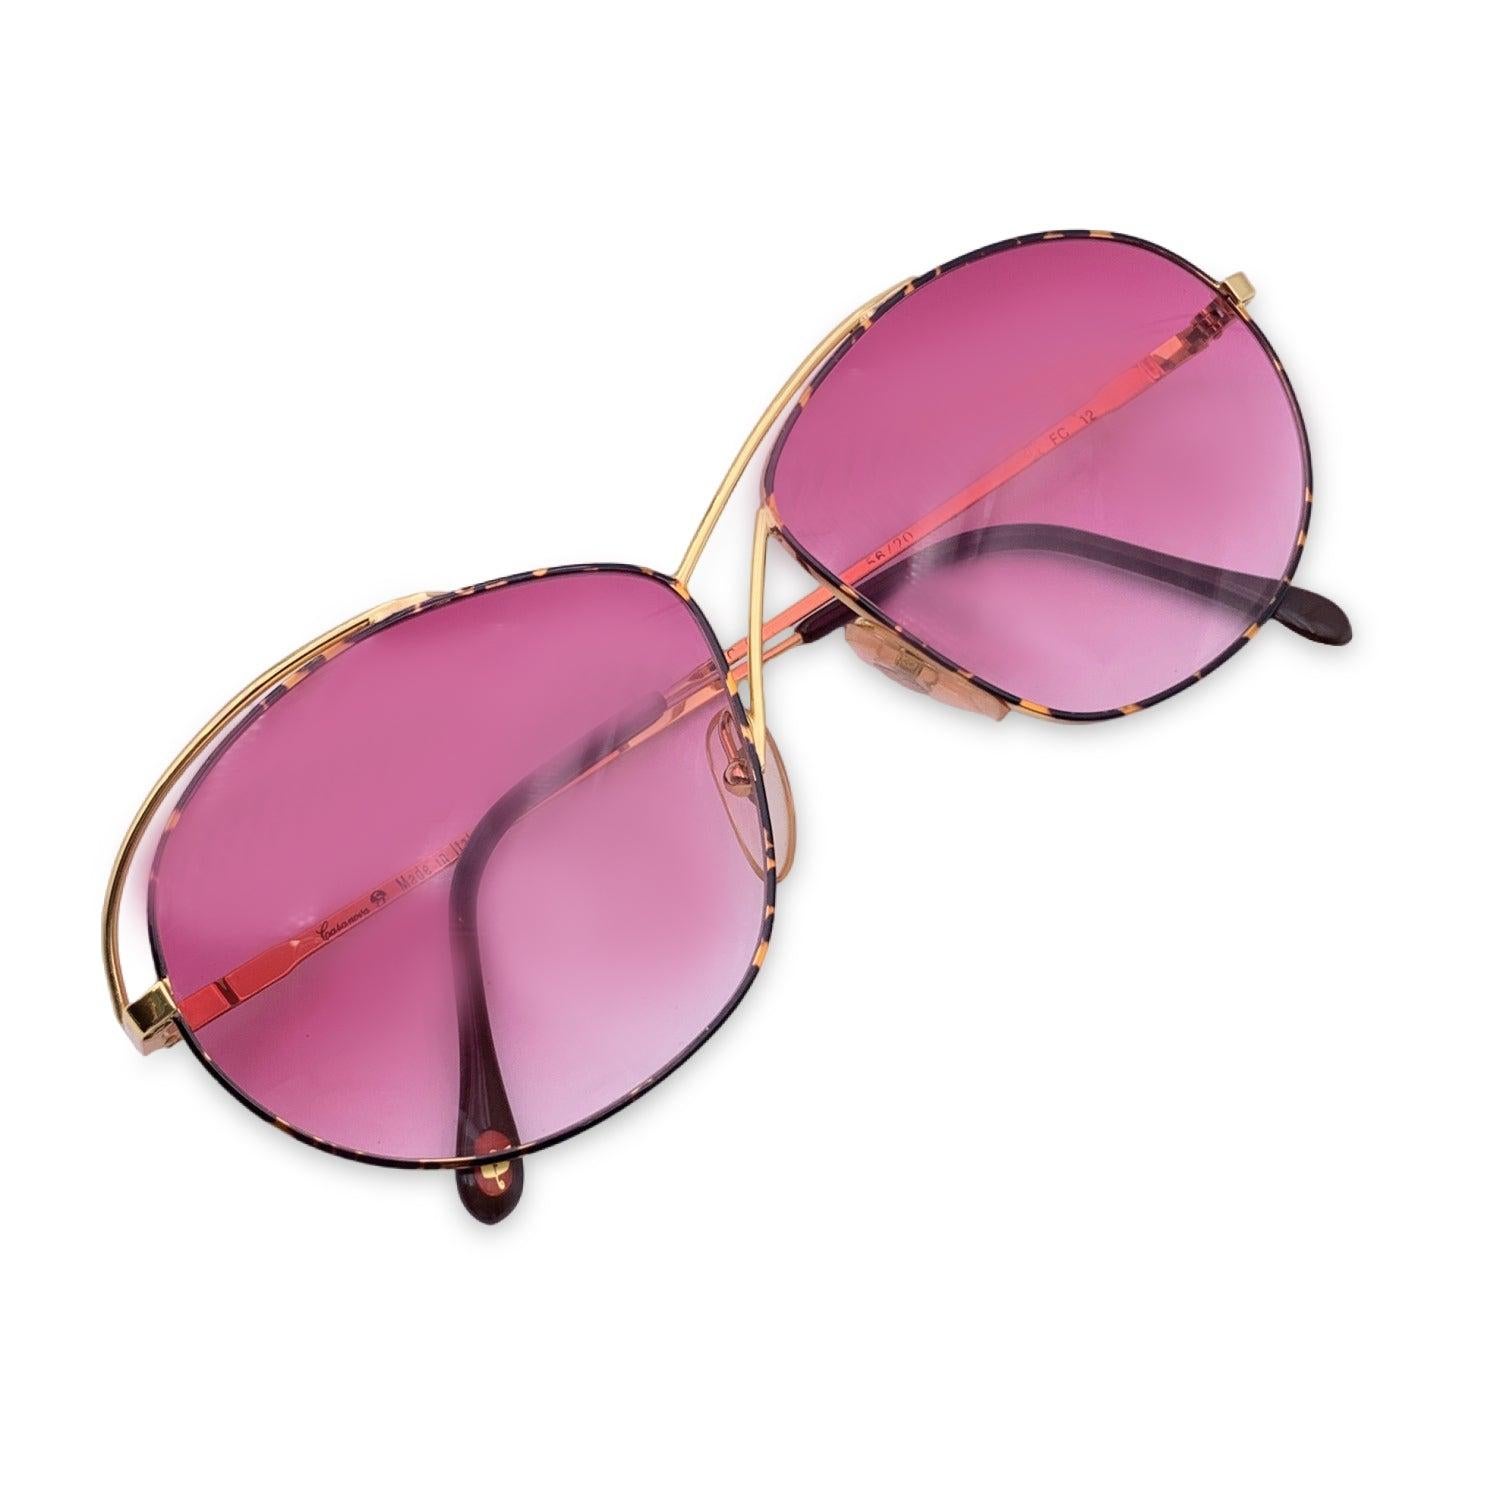 Vintage Casanova Butterfly Women sunglasses. Model C 02. Size: 56/20 130mm. Brown tortoise metal frame with two gold metal lines over the bridge and over the temples. Gold Plated (24K). 100% Total UVA/UVB protection. Gradient pink lenses. Made in